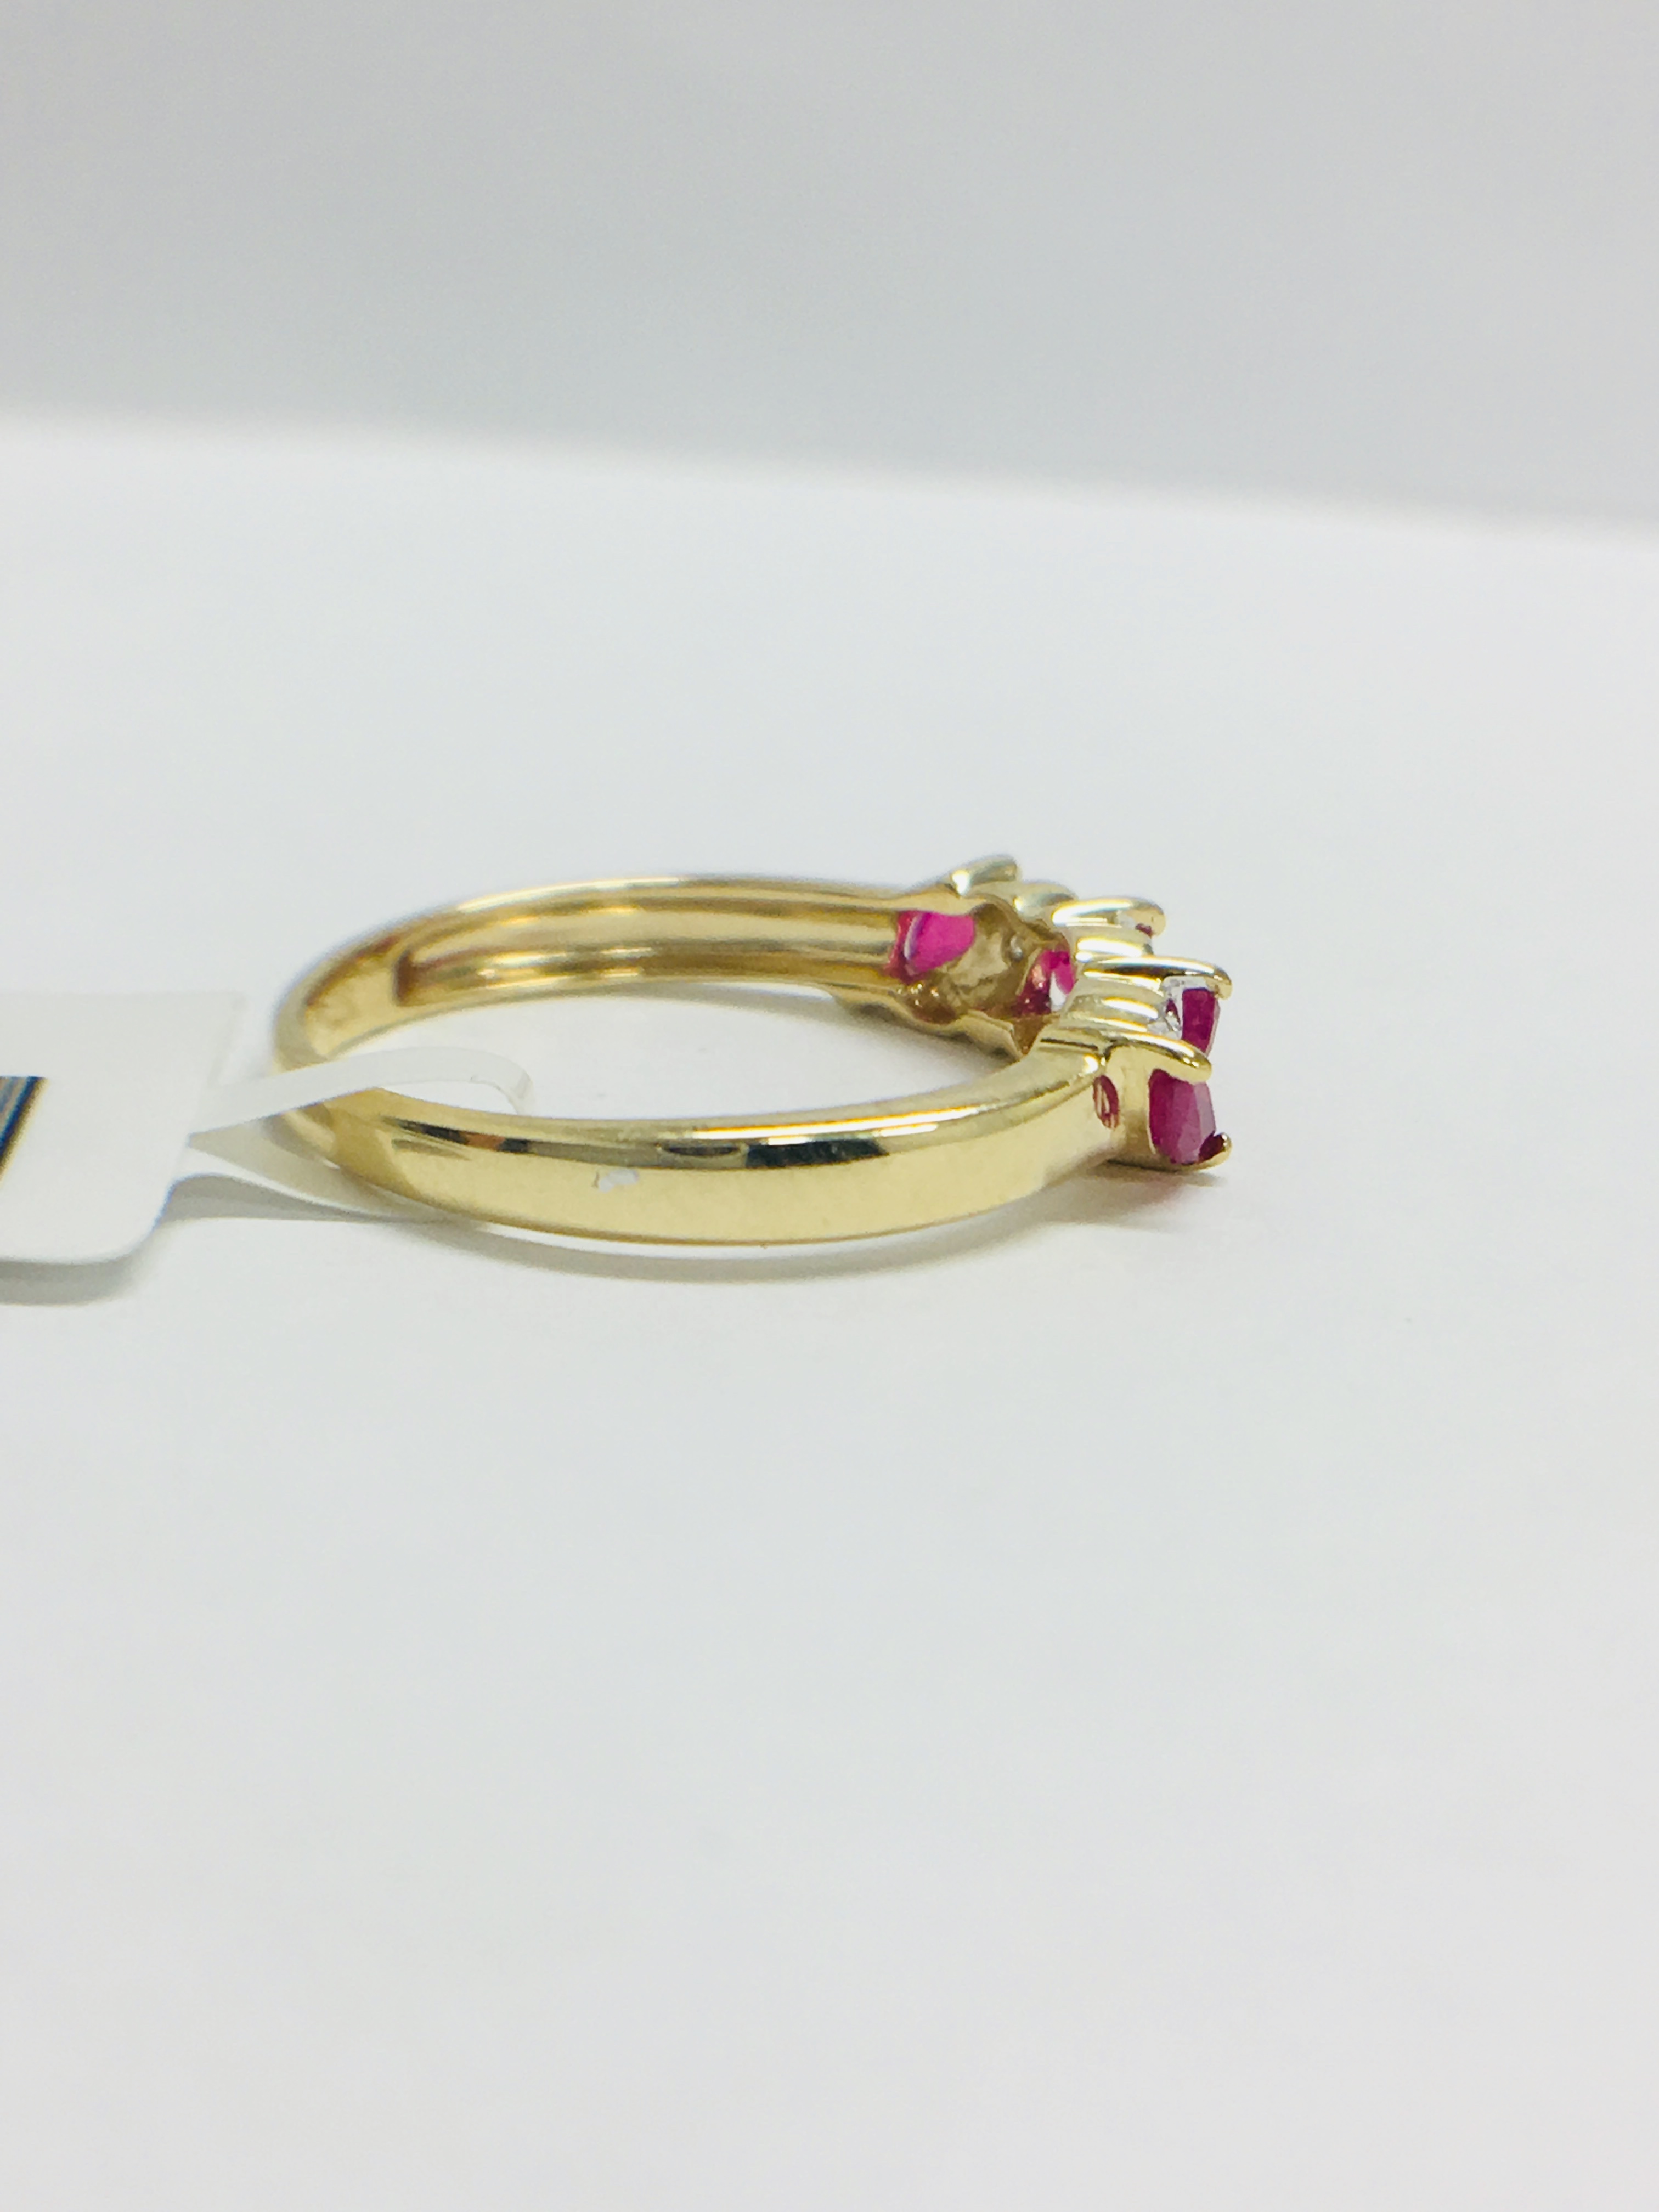 9ct yellow gold Ruby and diamond ring - Image 7 of 10